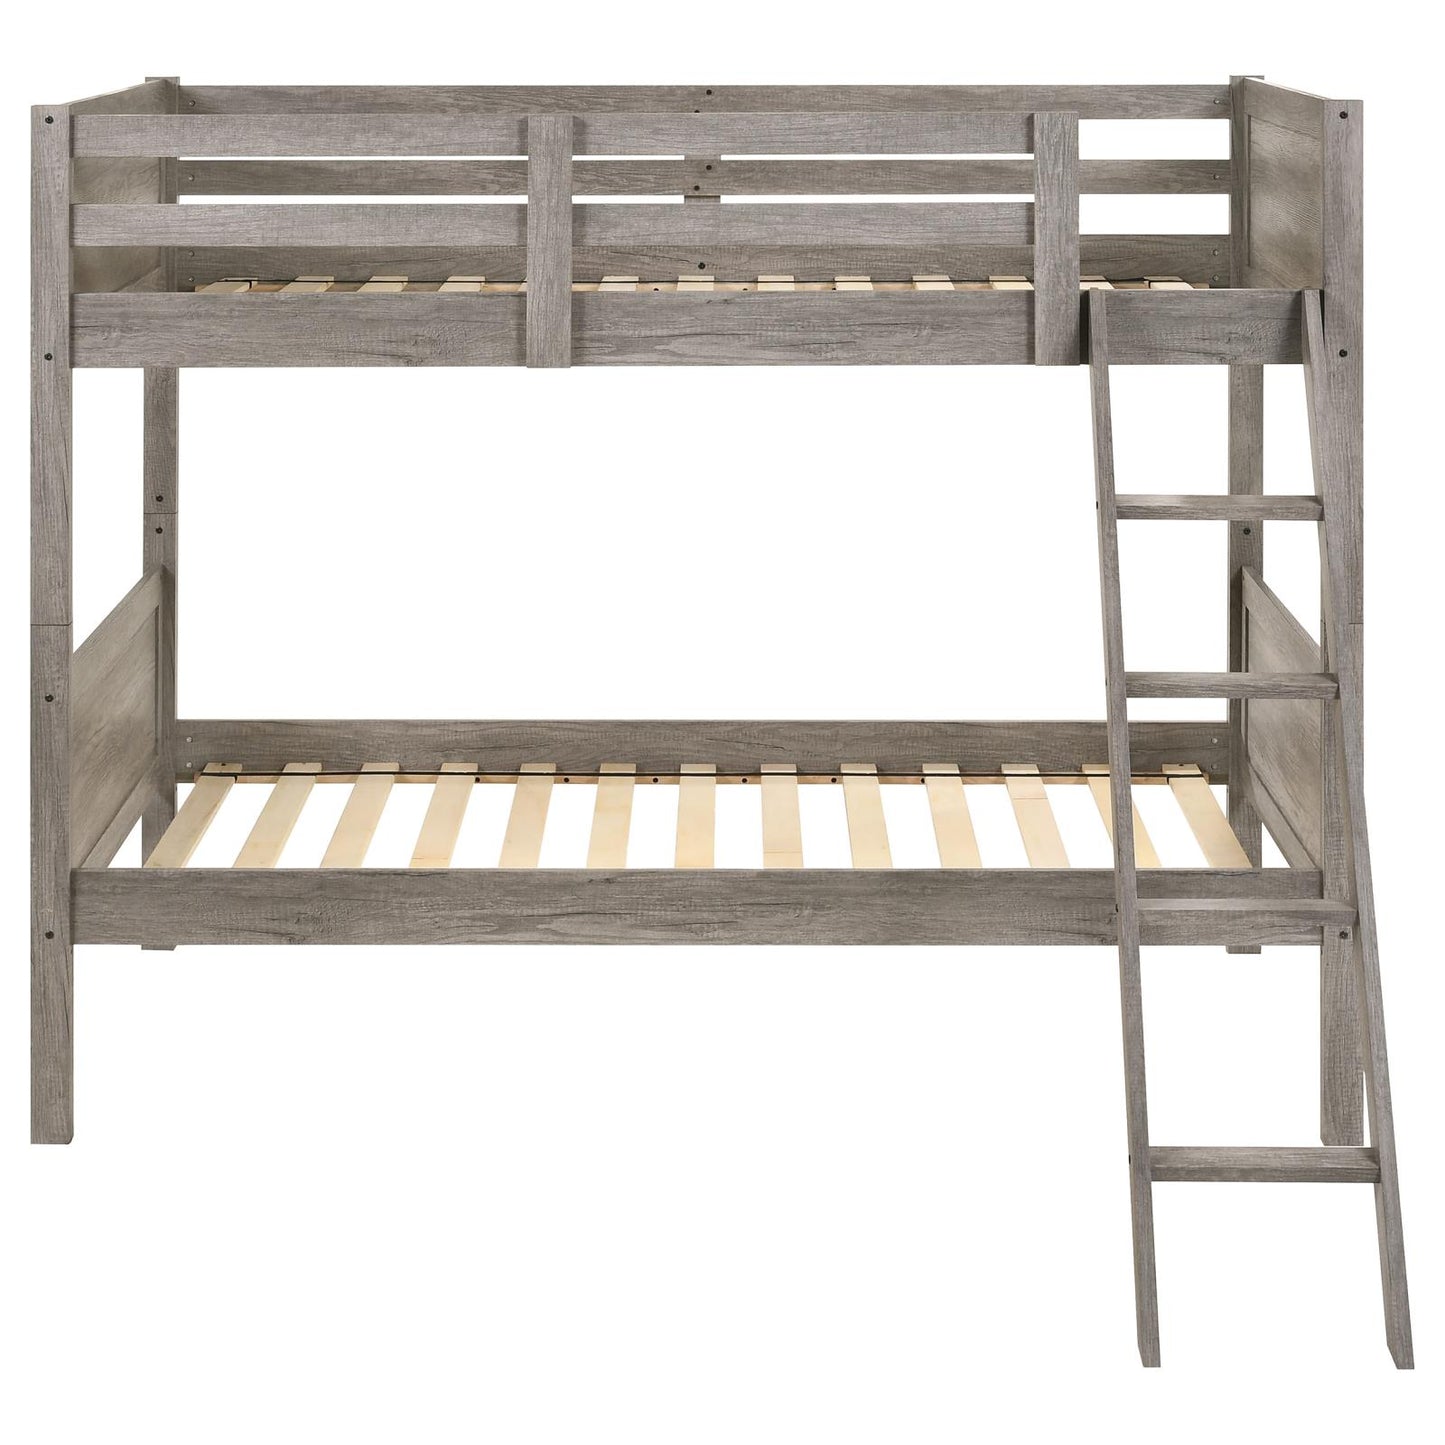 Ryder Twin over Twin Bunk Bed Weathered Taupe